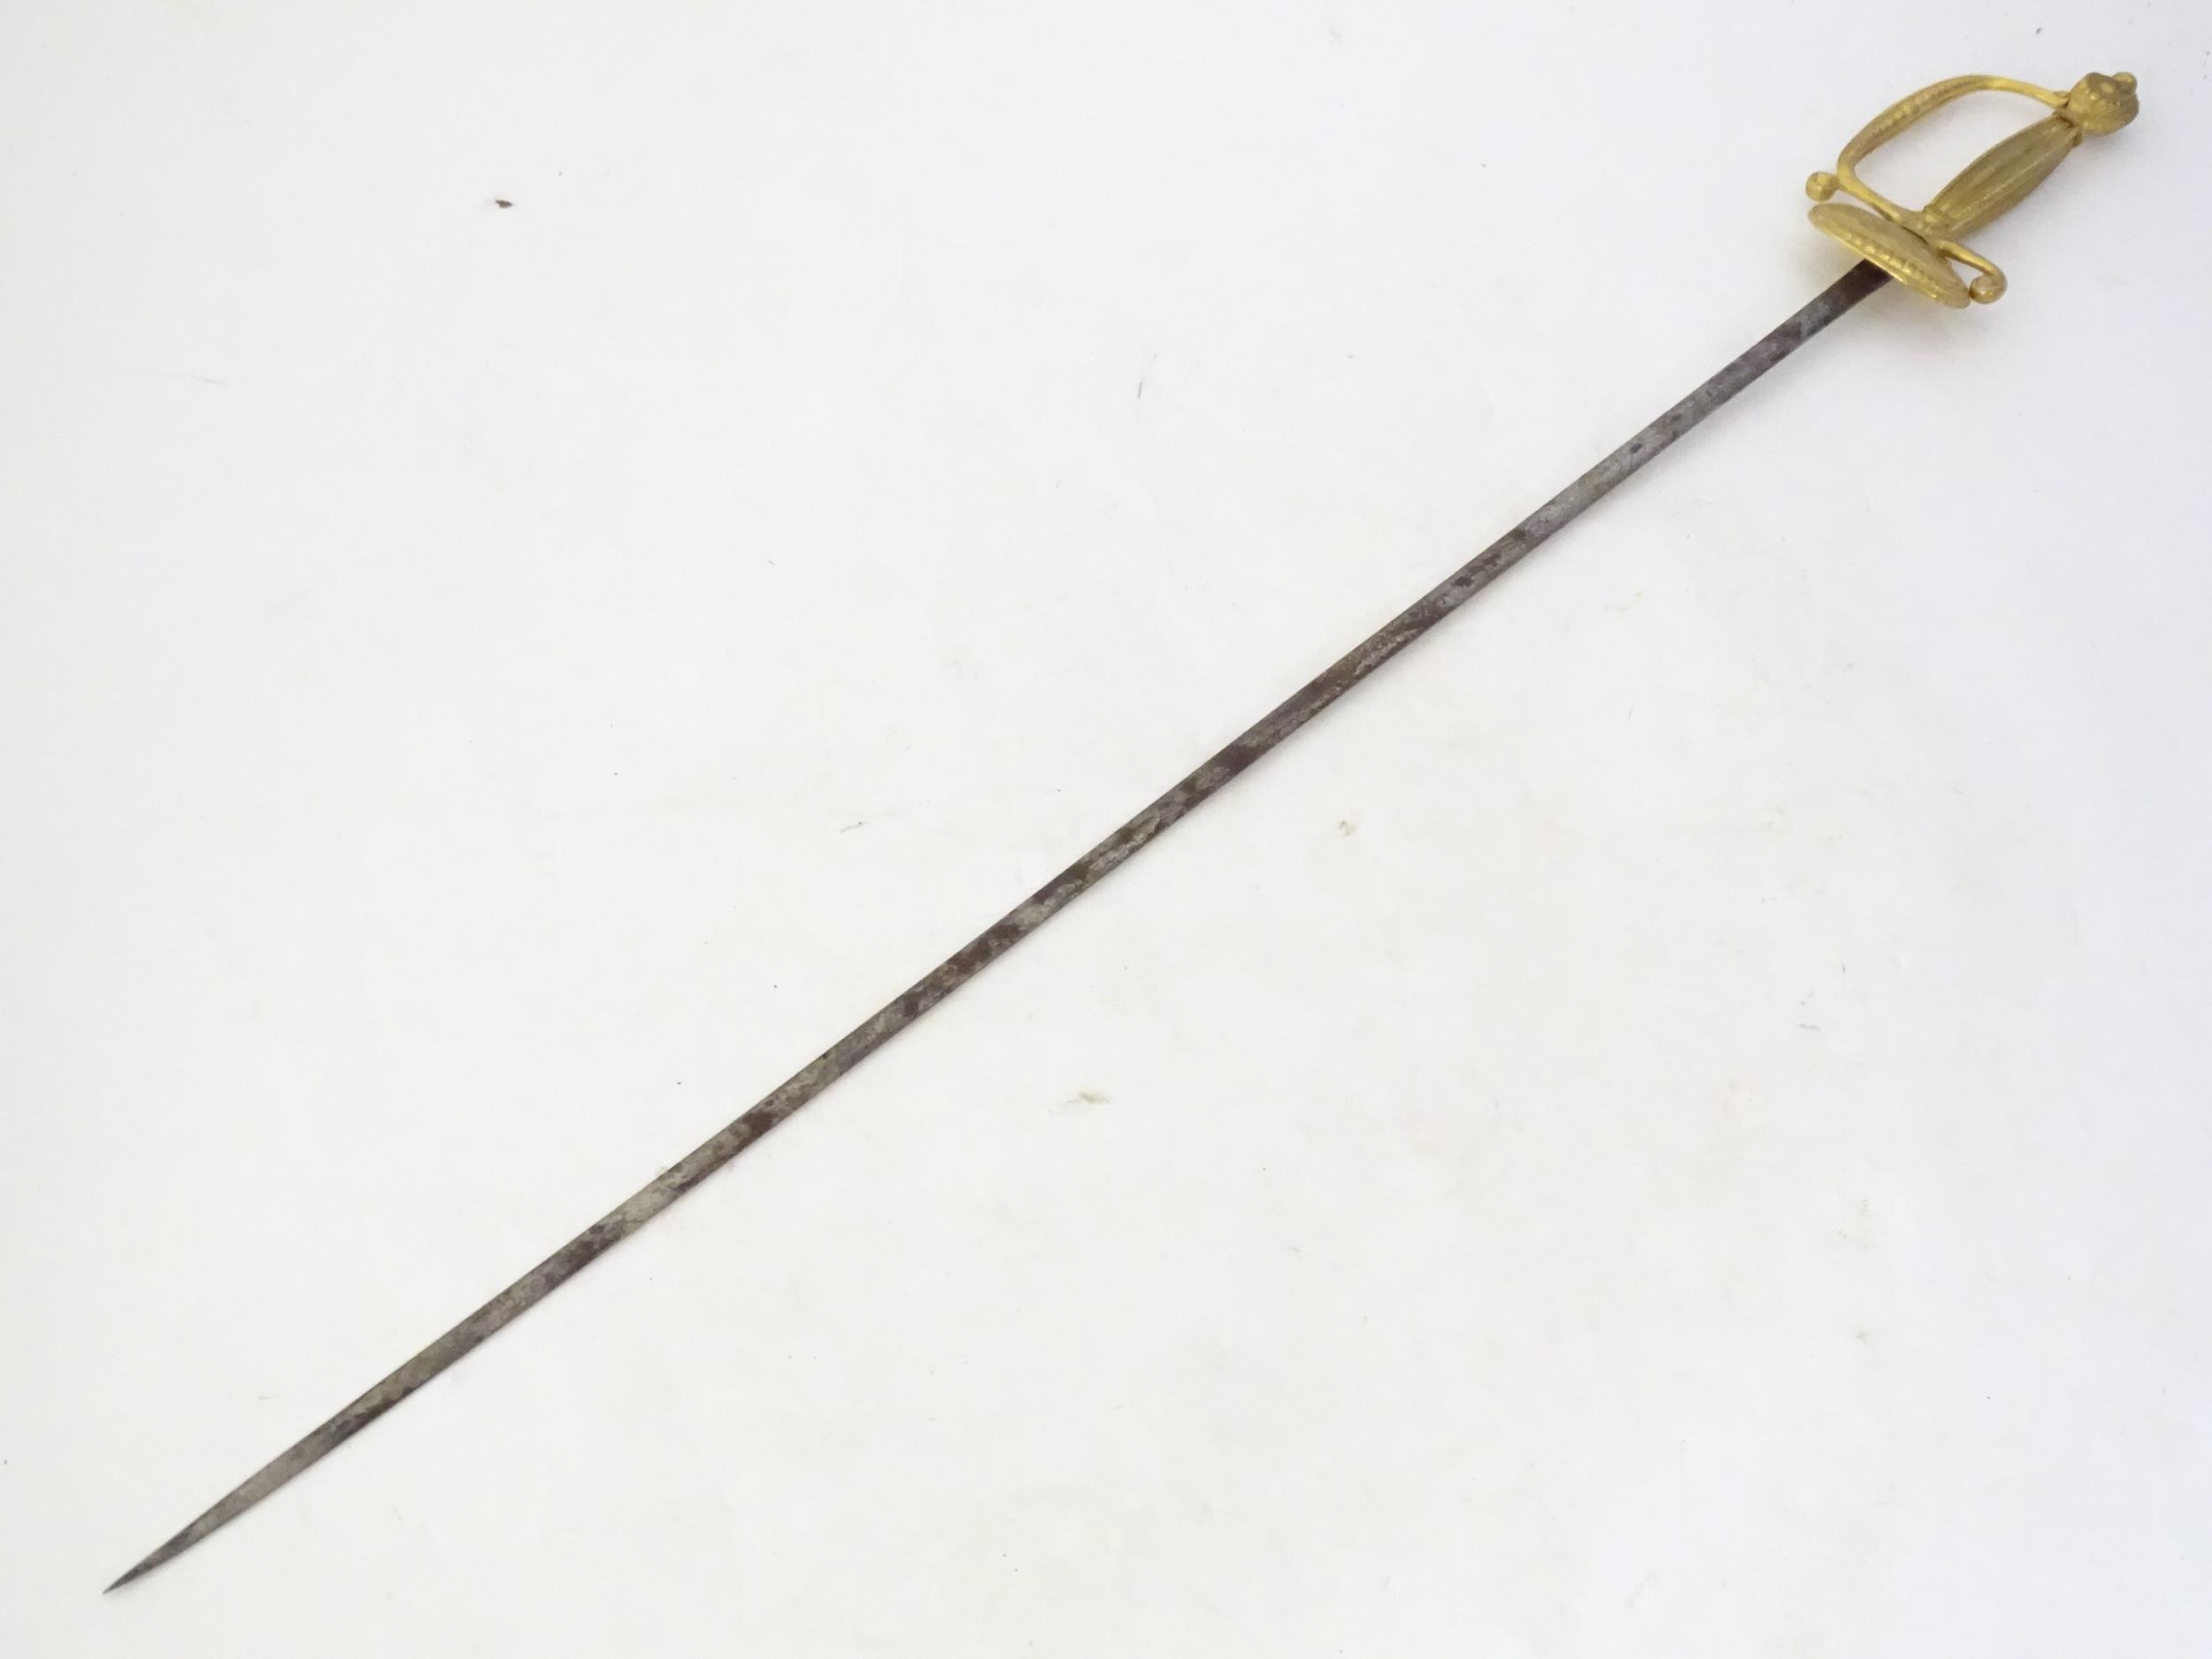 Militaria: an early to mid 20thC English court sword, the 30 3/4" steel blade decorated with - Image 5 of 15